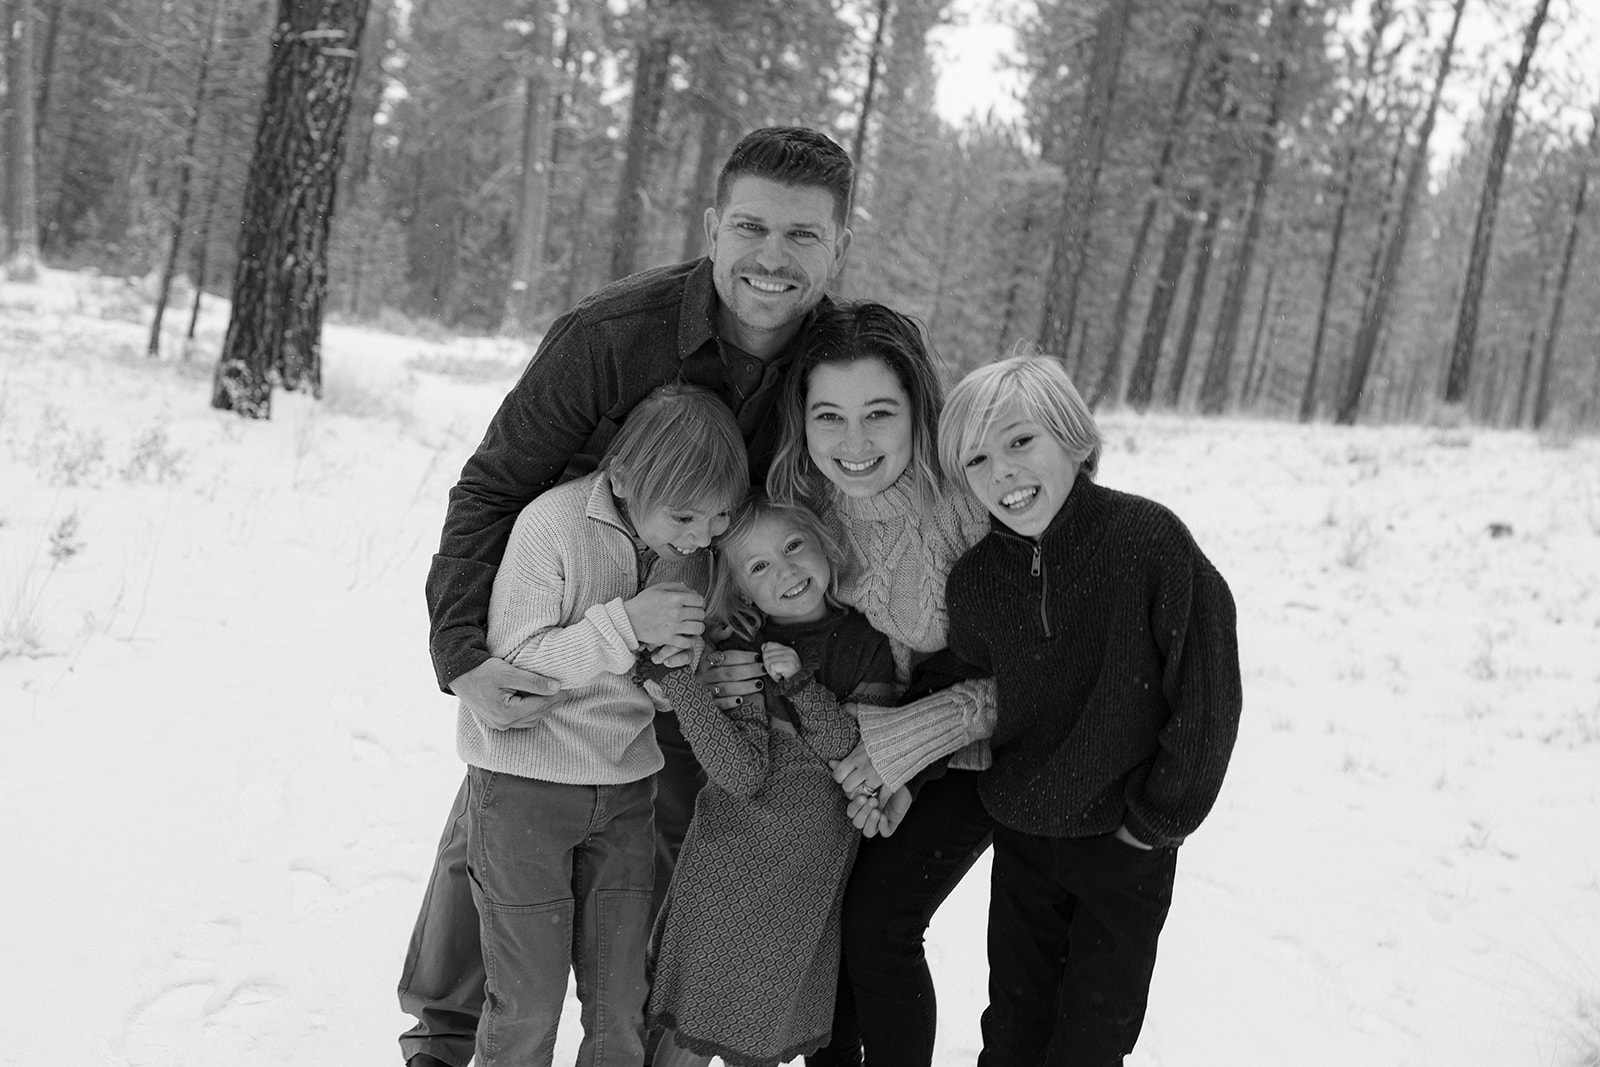 black and white image of a family laughing in a snowy setting in Bend, Oregon